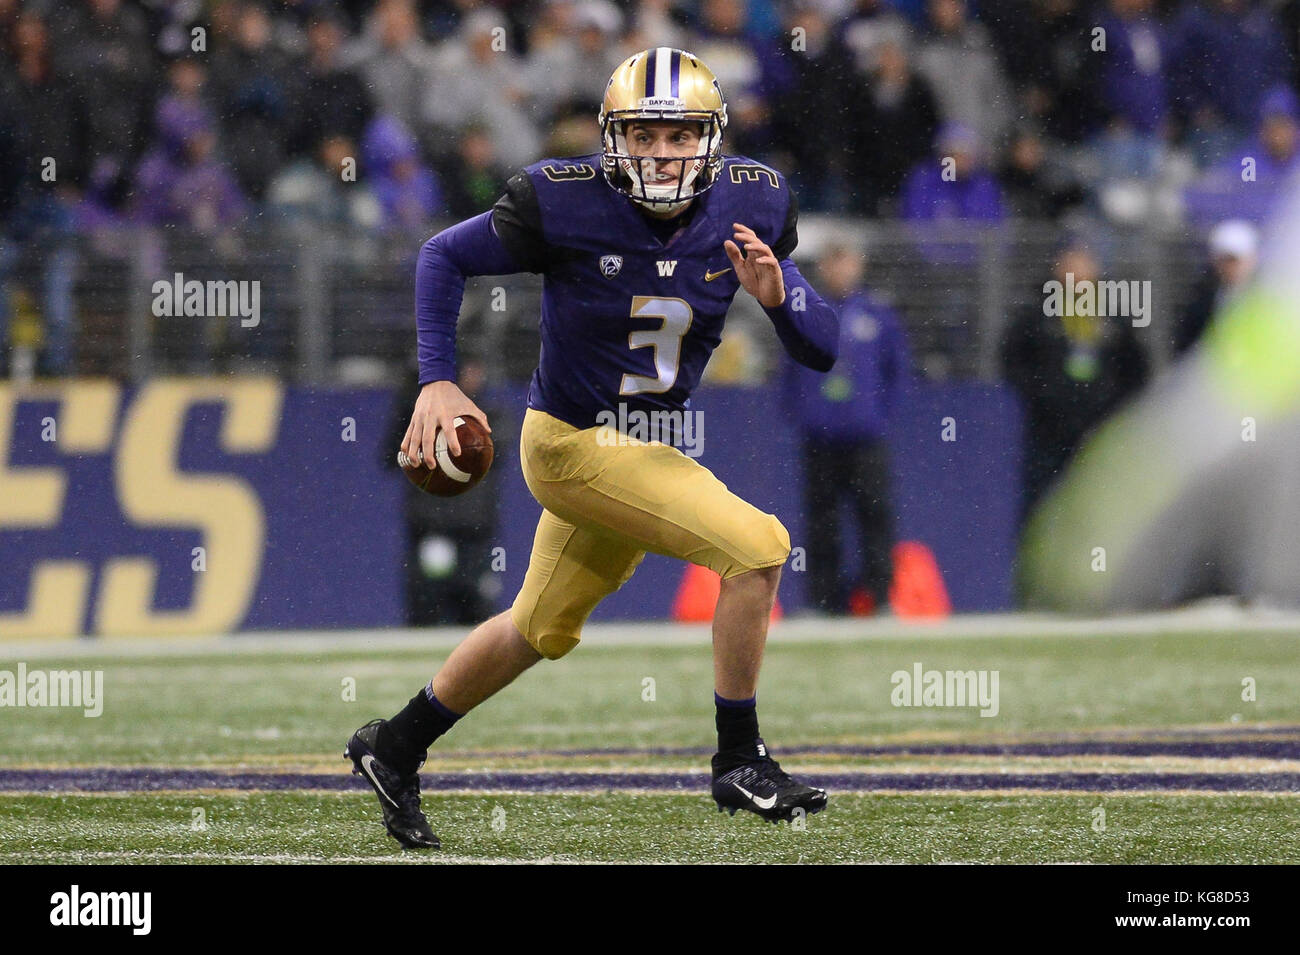 Seattle, WA, USA. 4th Nov, 2017. UW quarterback Jake Browning (3) scambles out of the pocket in a PAC12 football game between the Oregon Ducks and the Washington Huskies. The game was played at Husky Stadium on the University of Washington campus in Seattle, WA. Jeff Halstead/CSM/Alamy Live News Stock Photo